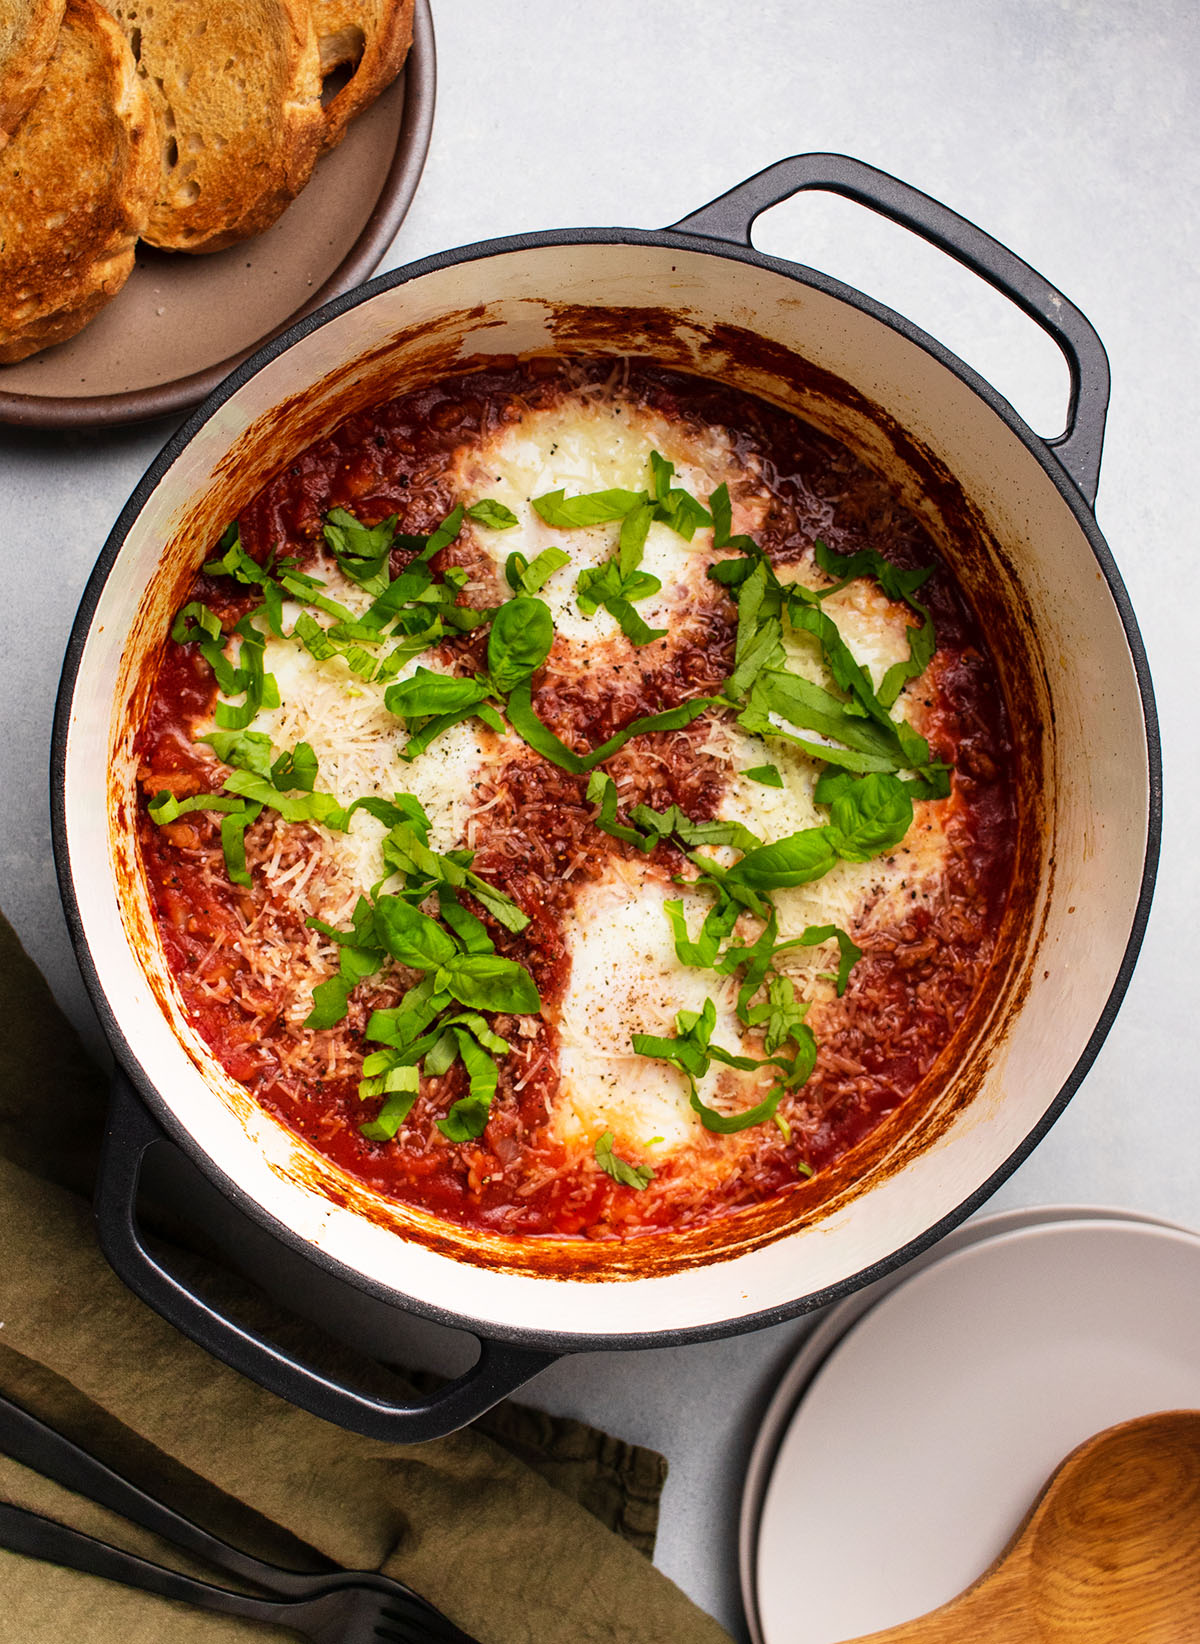 Large pot filled with tomato sauce and baked eggs, topped with fresh basil.